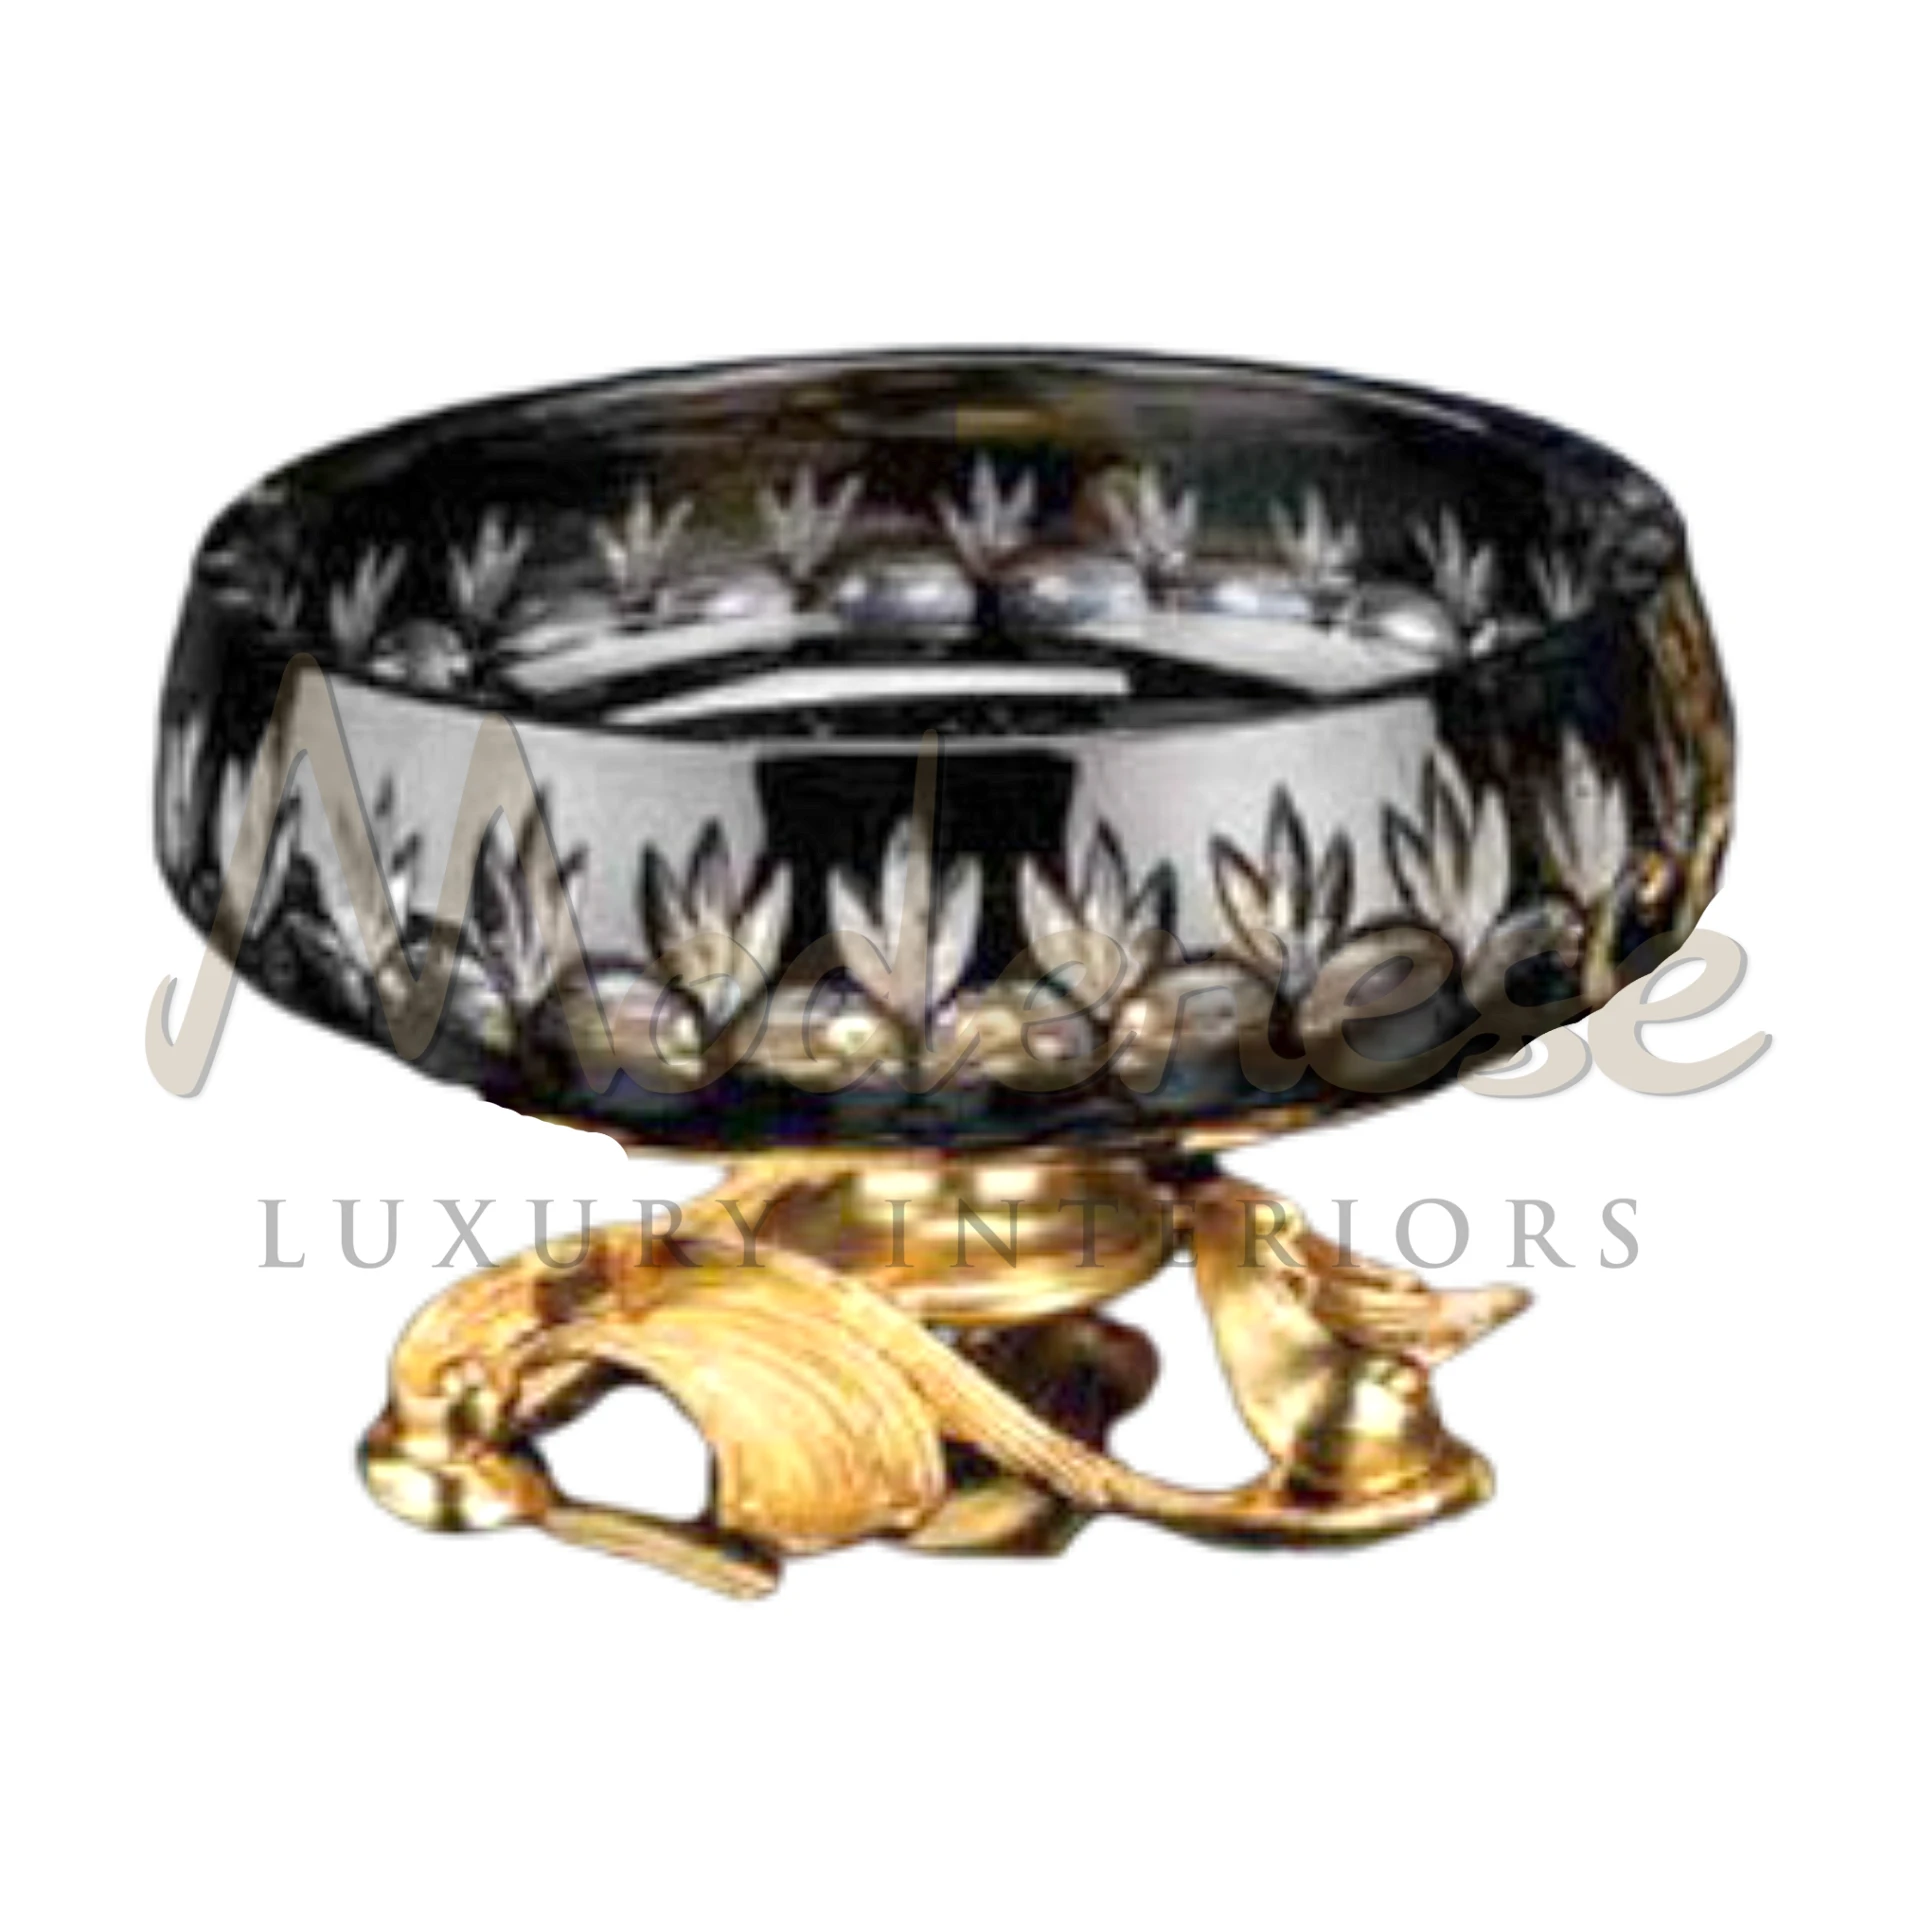 Elegant Black Glass Bowl with intricate patterns, a high-quality piece that brings timeless sophistication and elegance to any luxury interior design setting.






